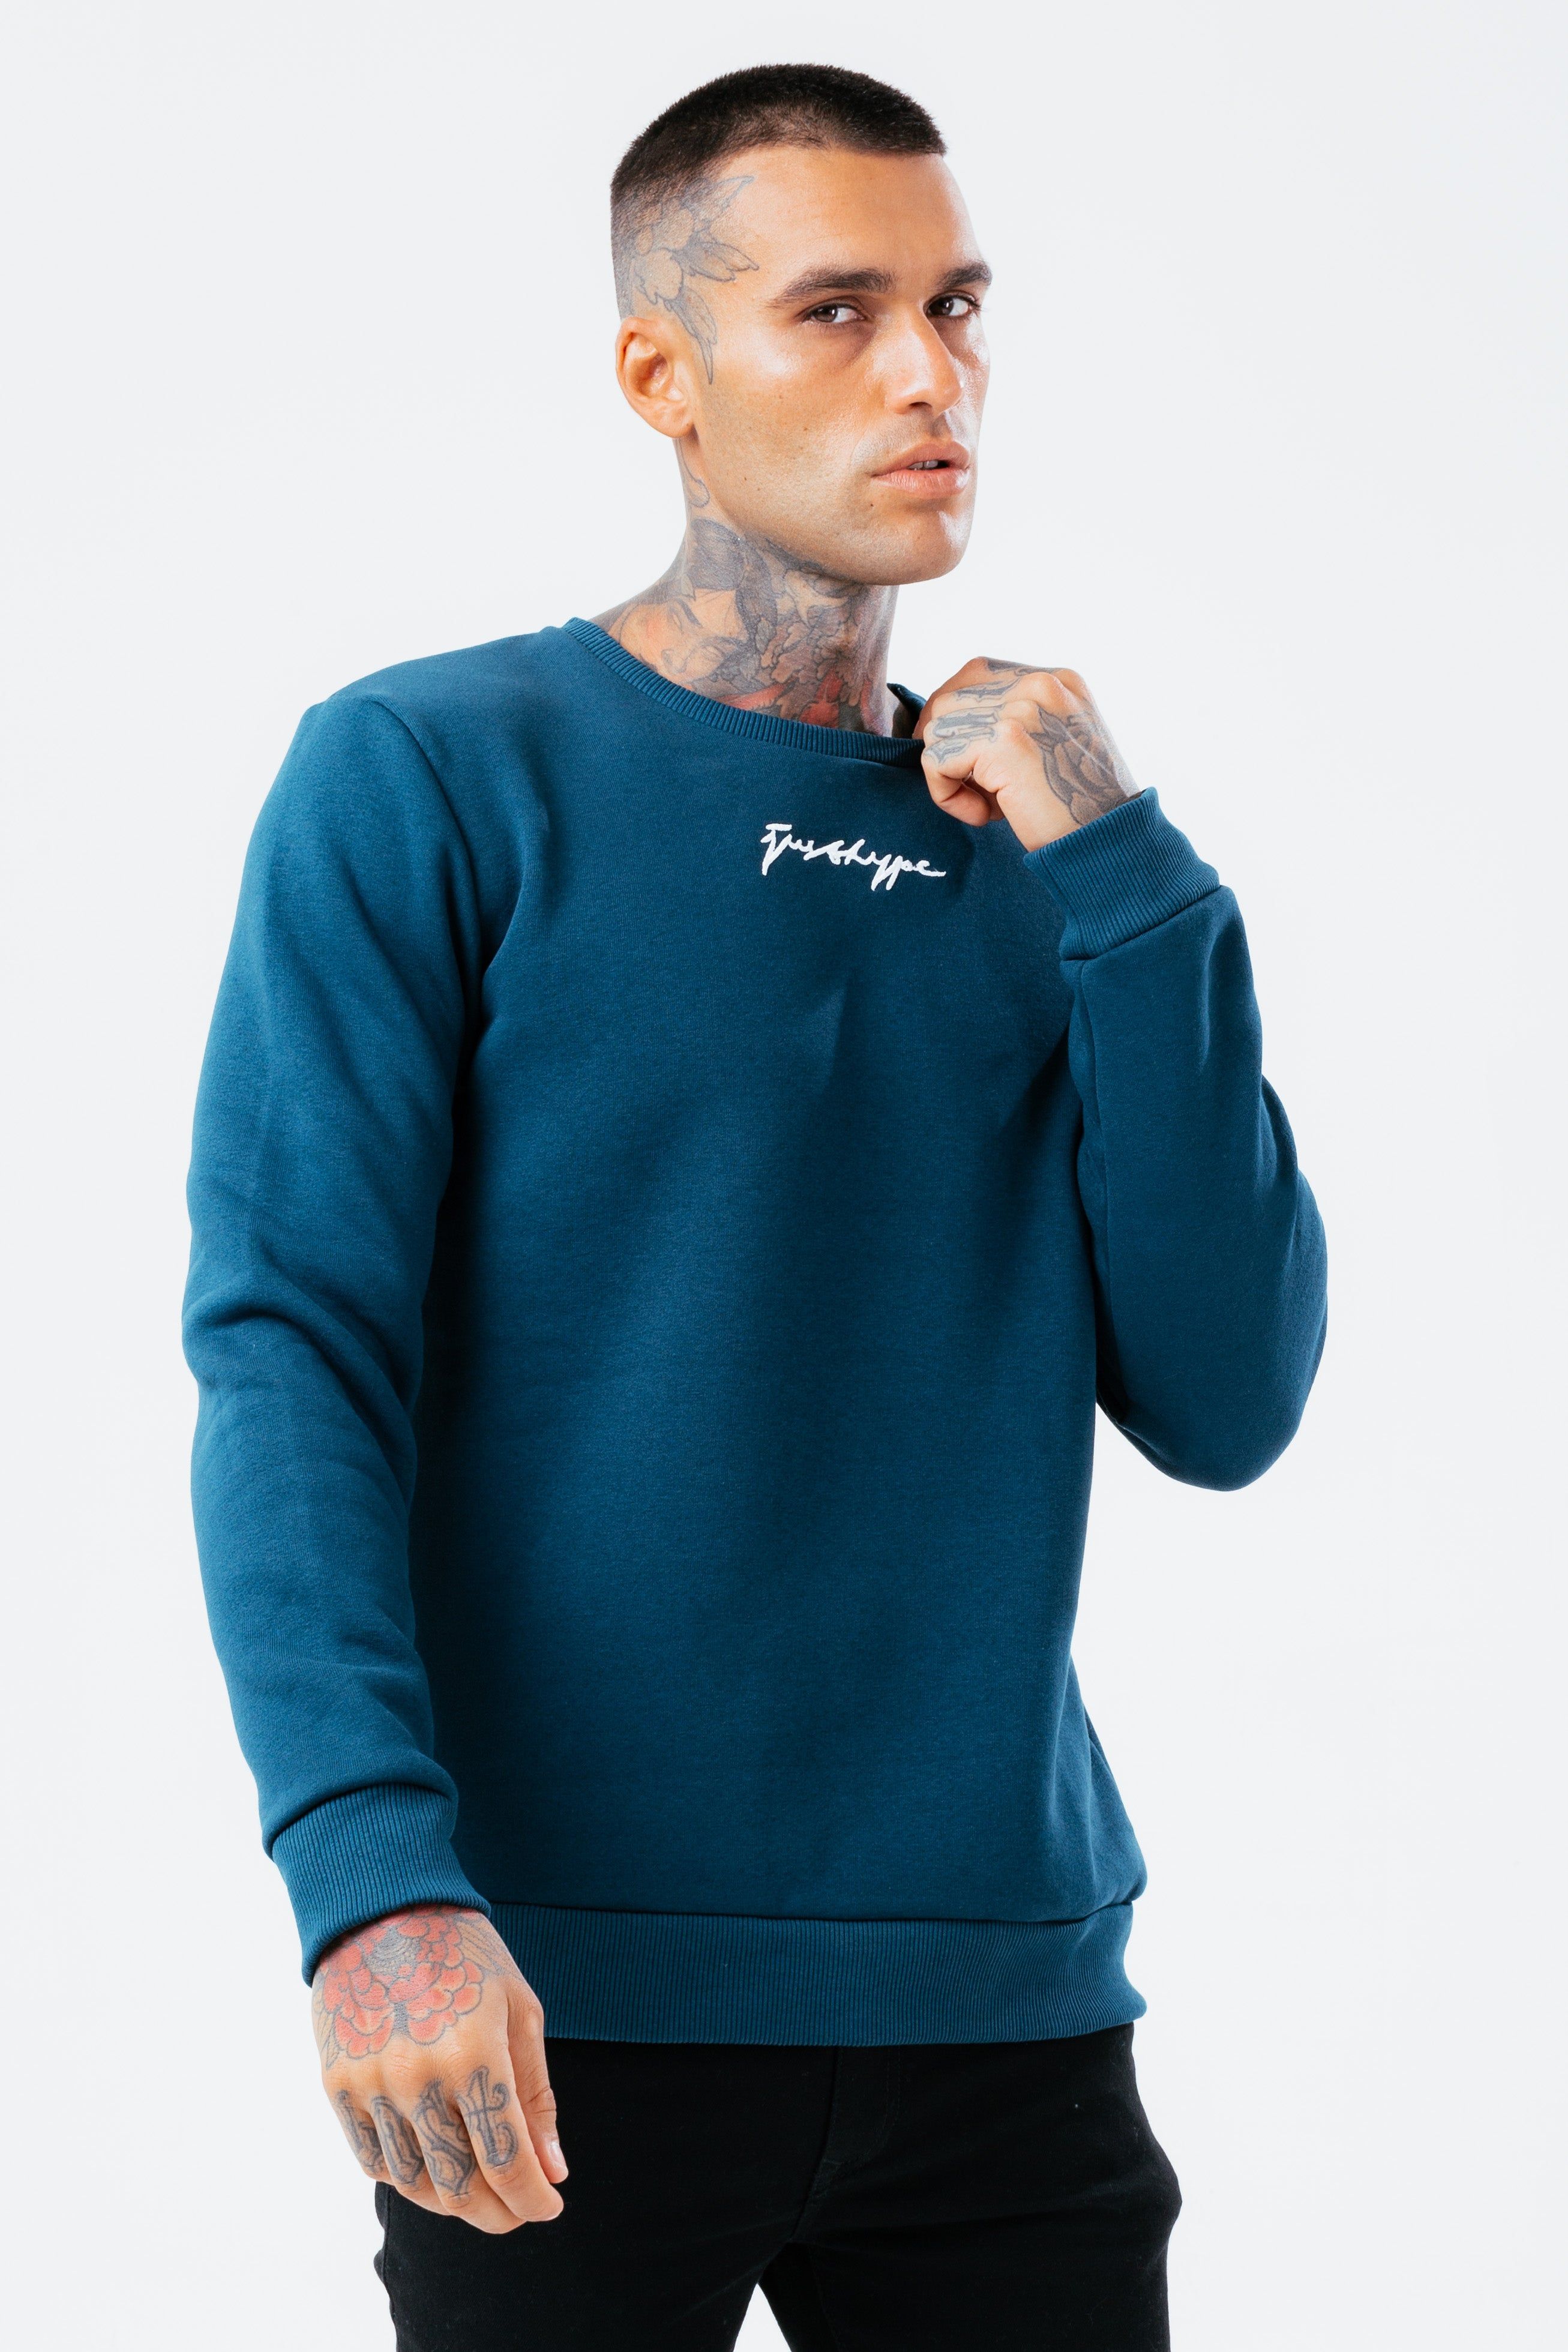 The HYPE. Men's Crew Neck Jumper is designed in our mens standard jumper shape. With a soft touch fabric base for supreme comfort. With a crew neckline, long sleeves, fitted cuffs and hem. The model wears a size M. If you like an oversized fit, go up a size, if you like a tight fit go down a size, for a standard fit, select your usual size. Machine washable.